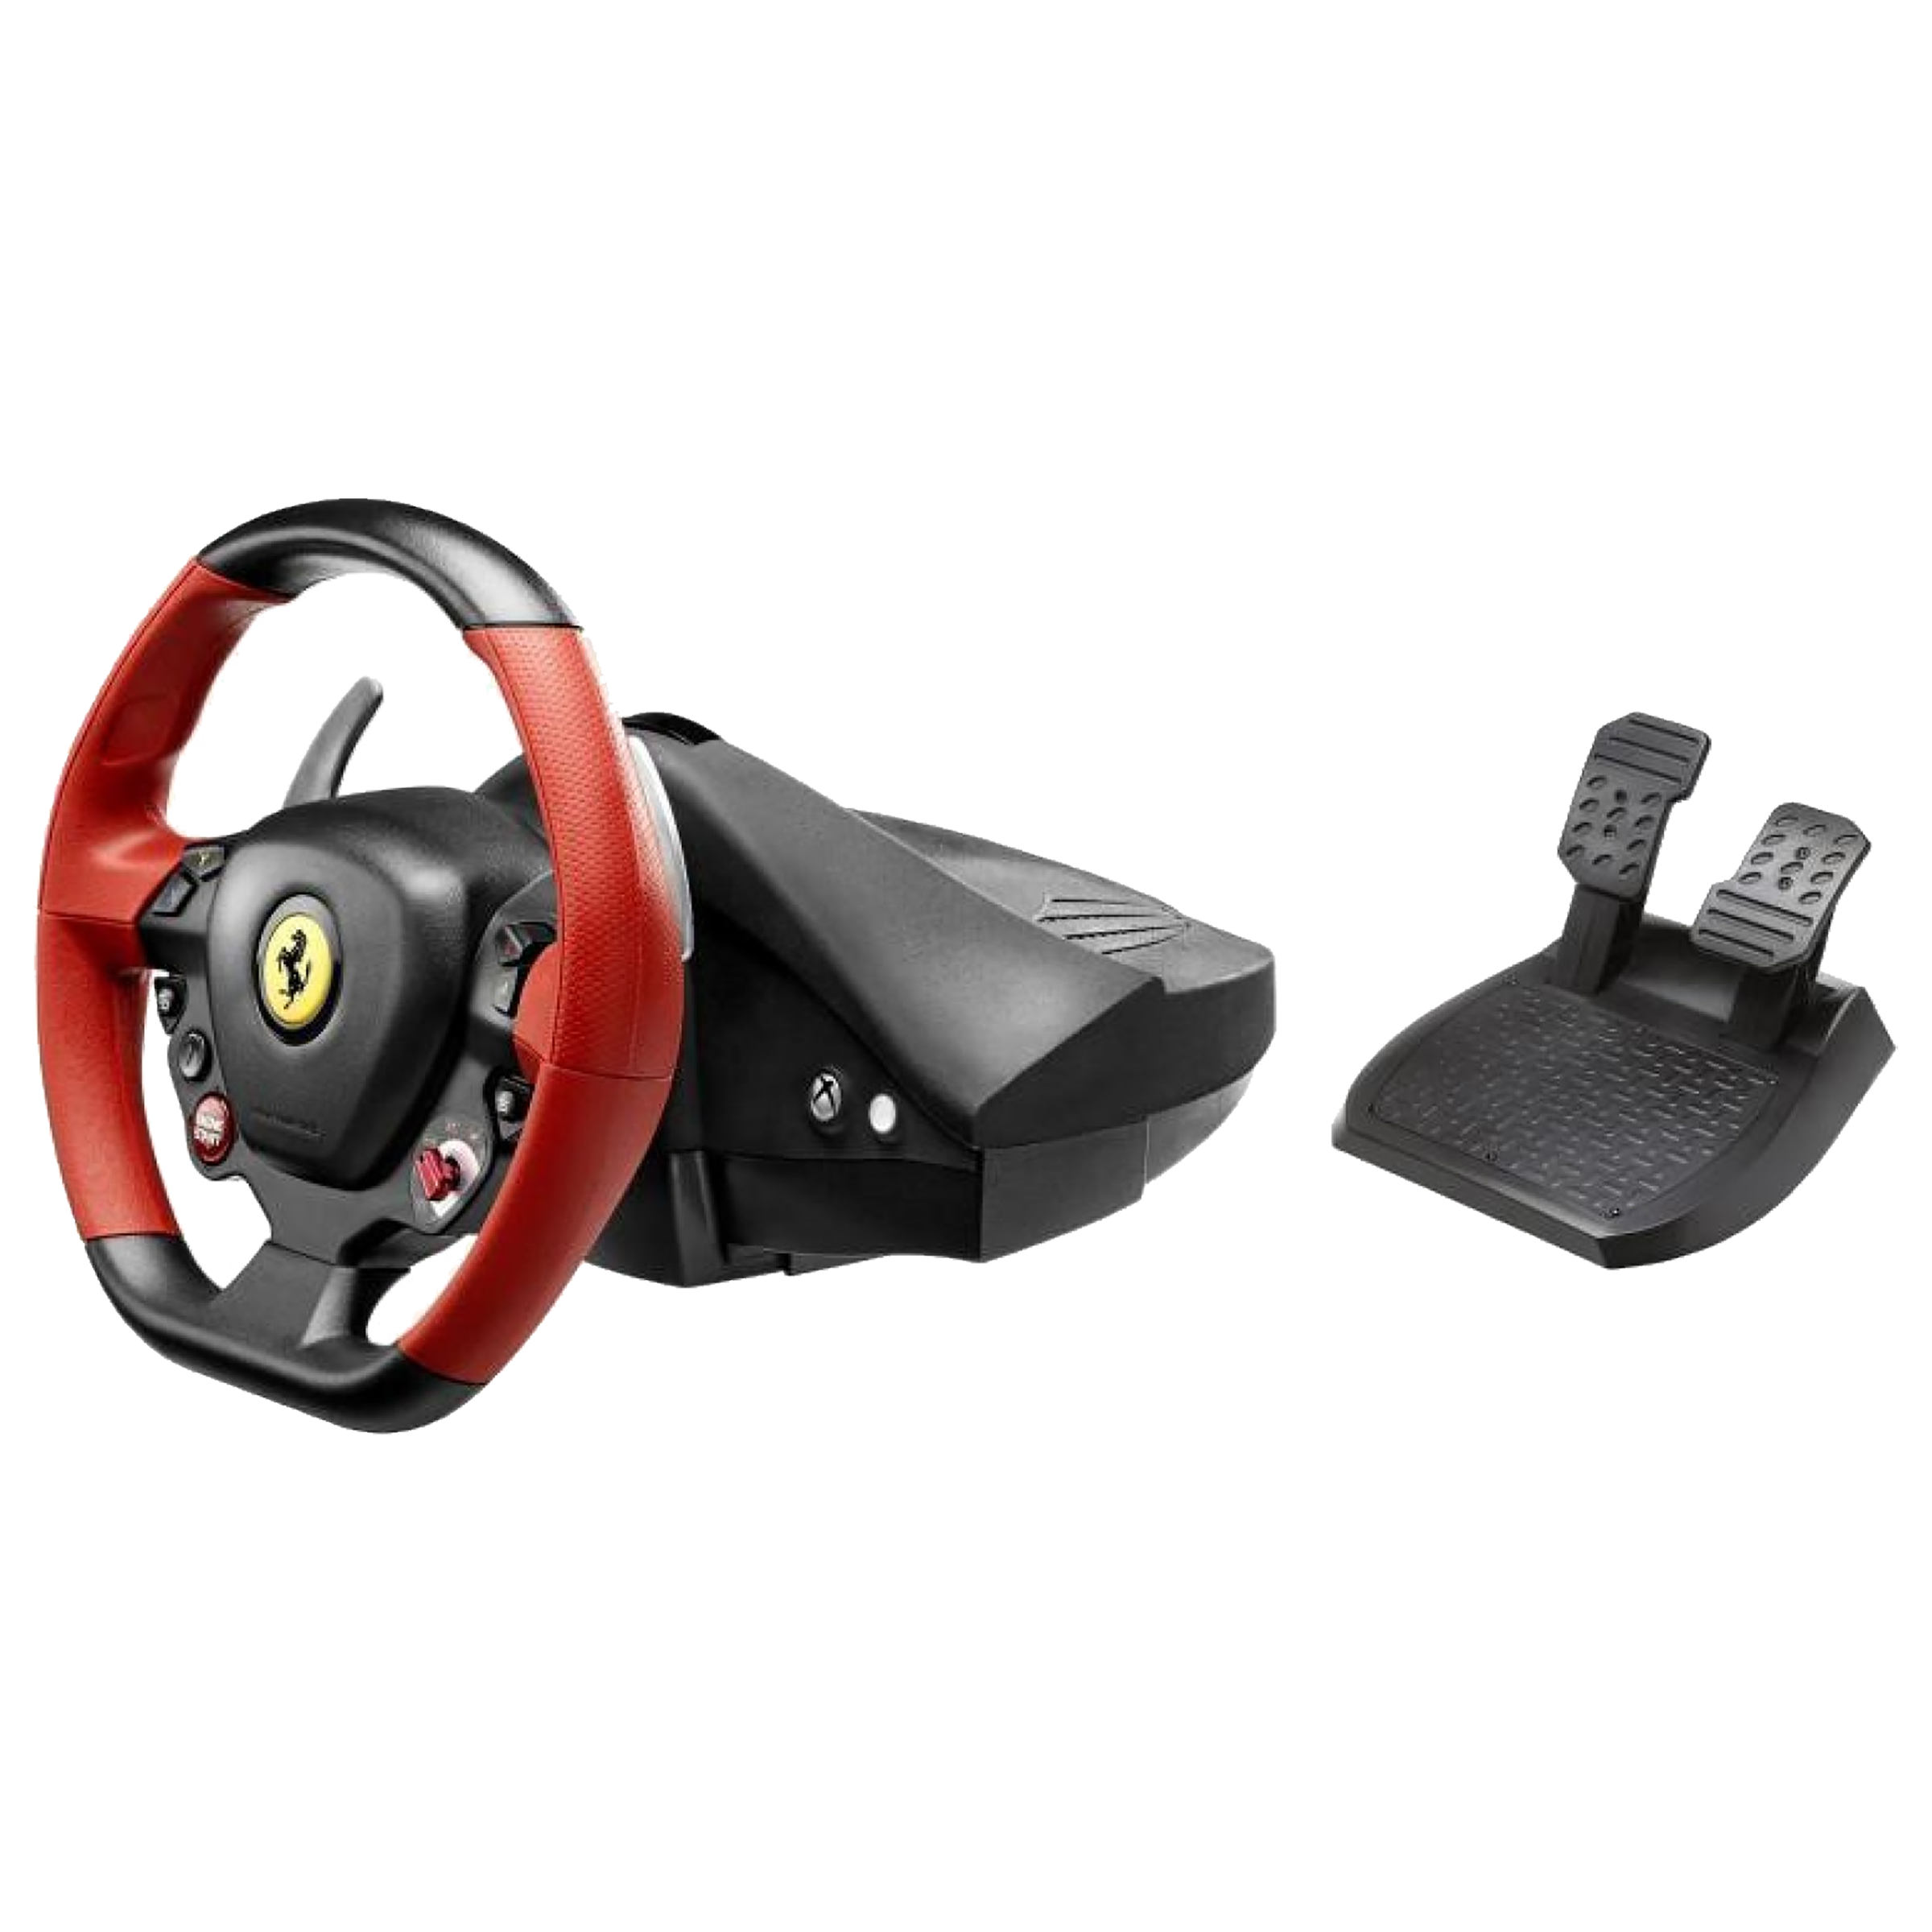 Thrustmaster Ferrari 458 Spider Racing Wheel For Xbox One (Bungee Cord Mechanism, Red/Black)_4